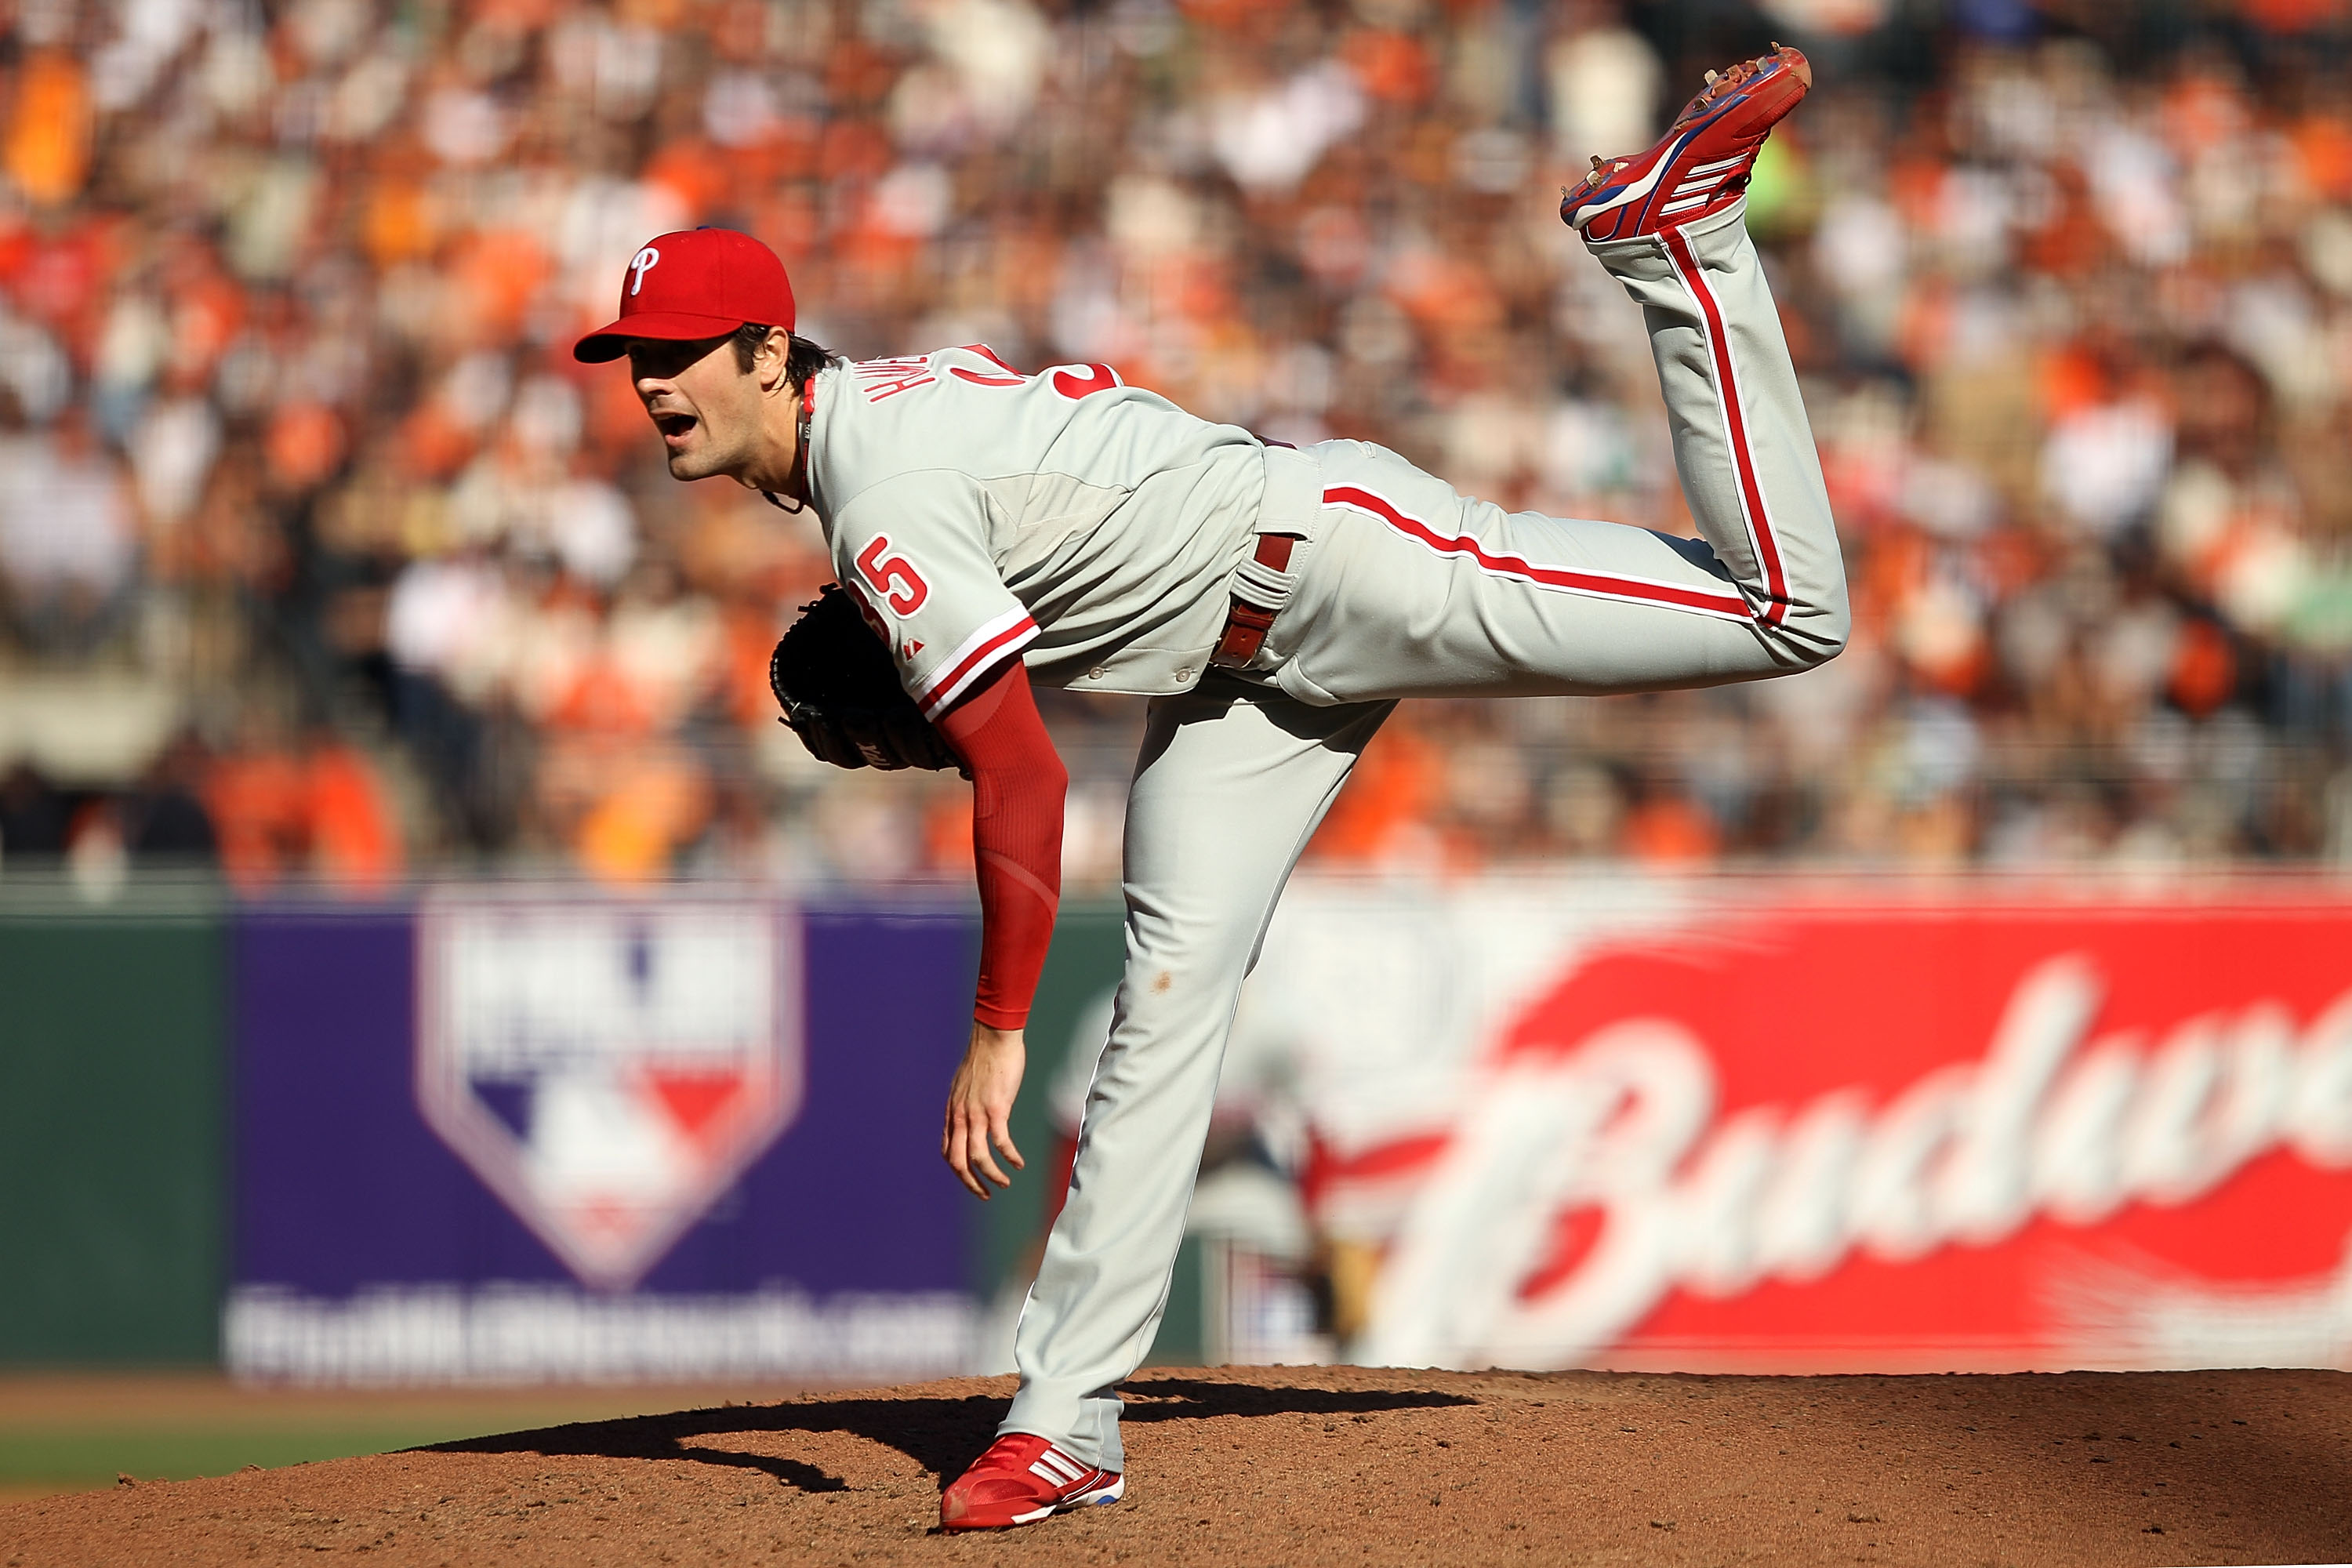 Washington Nationals PDB: The Phillies' Cole Hamels, Opposing